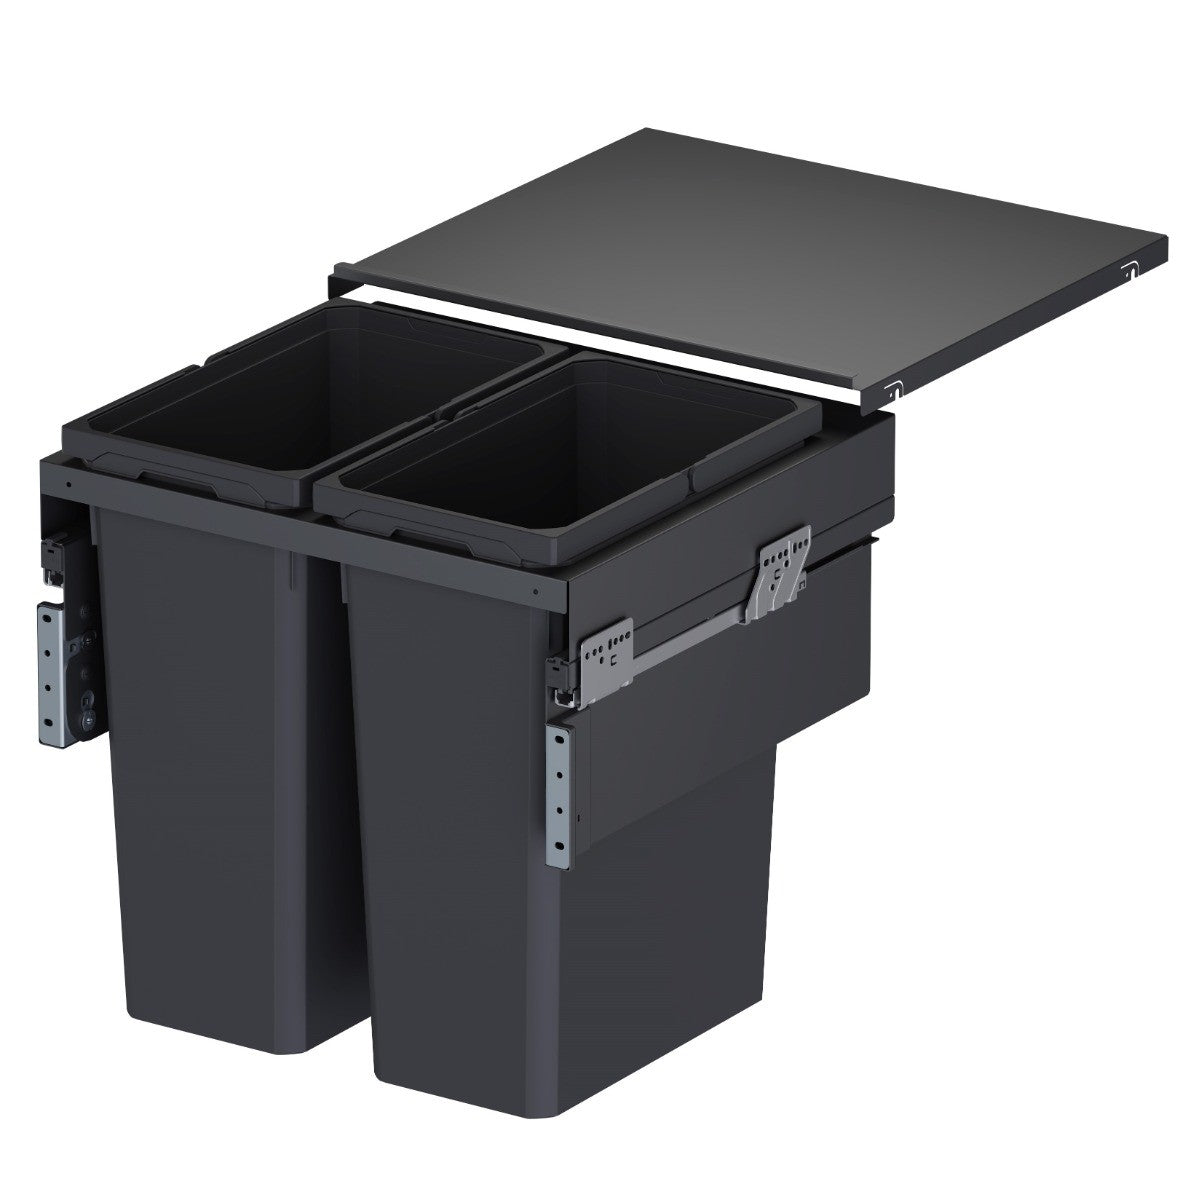 Vauth-Sagel ES-Pro integrated  2-Compartment 88L kitchen bin ideal for separating waste and recycling